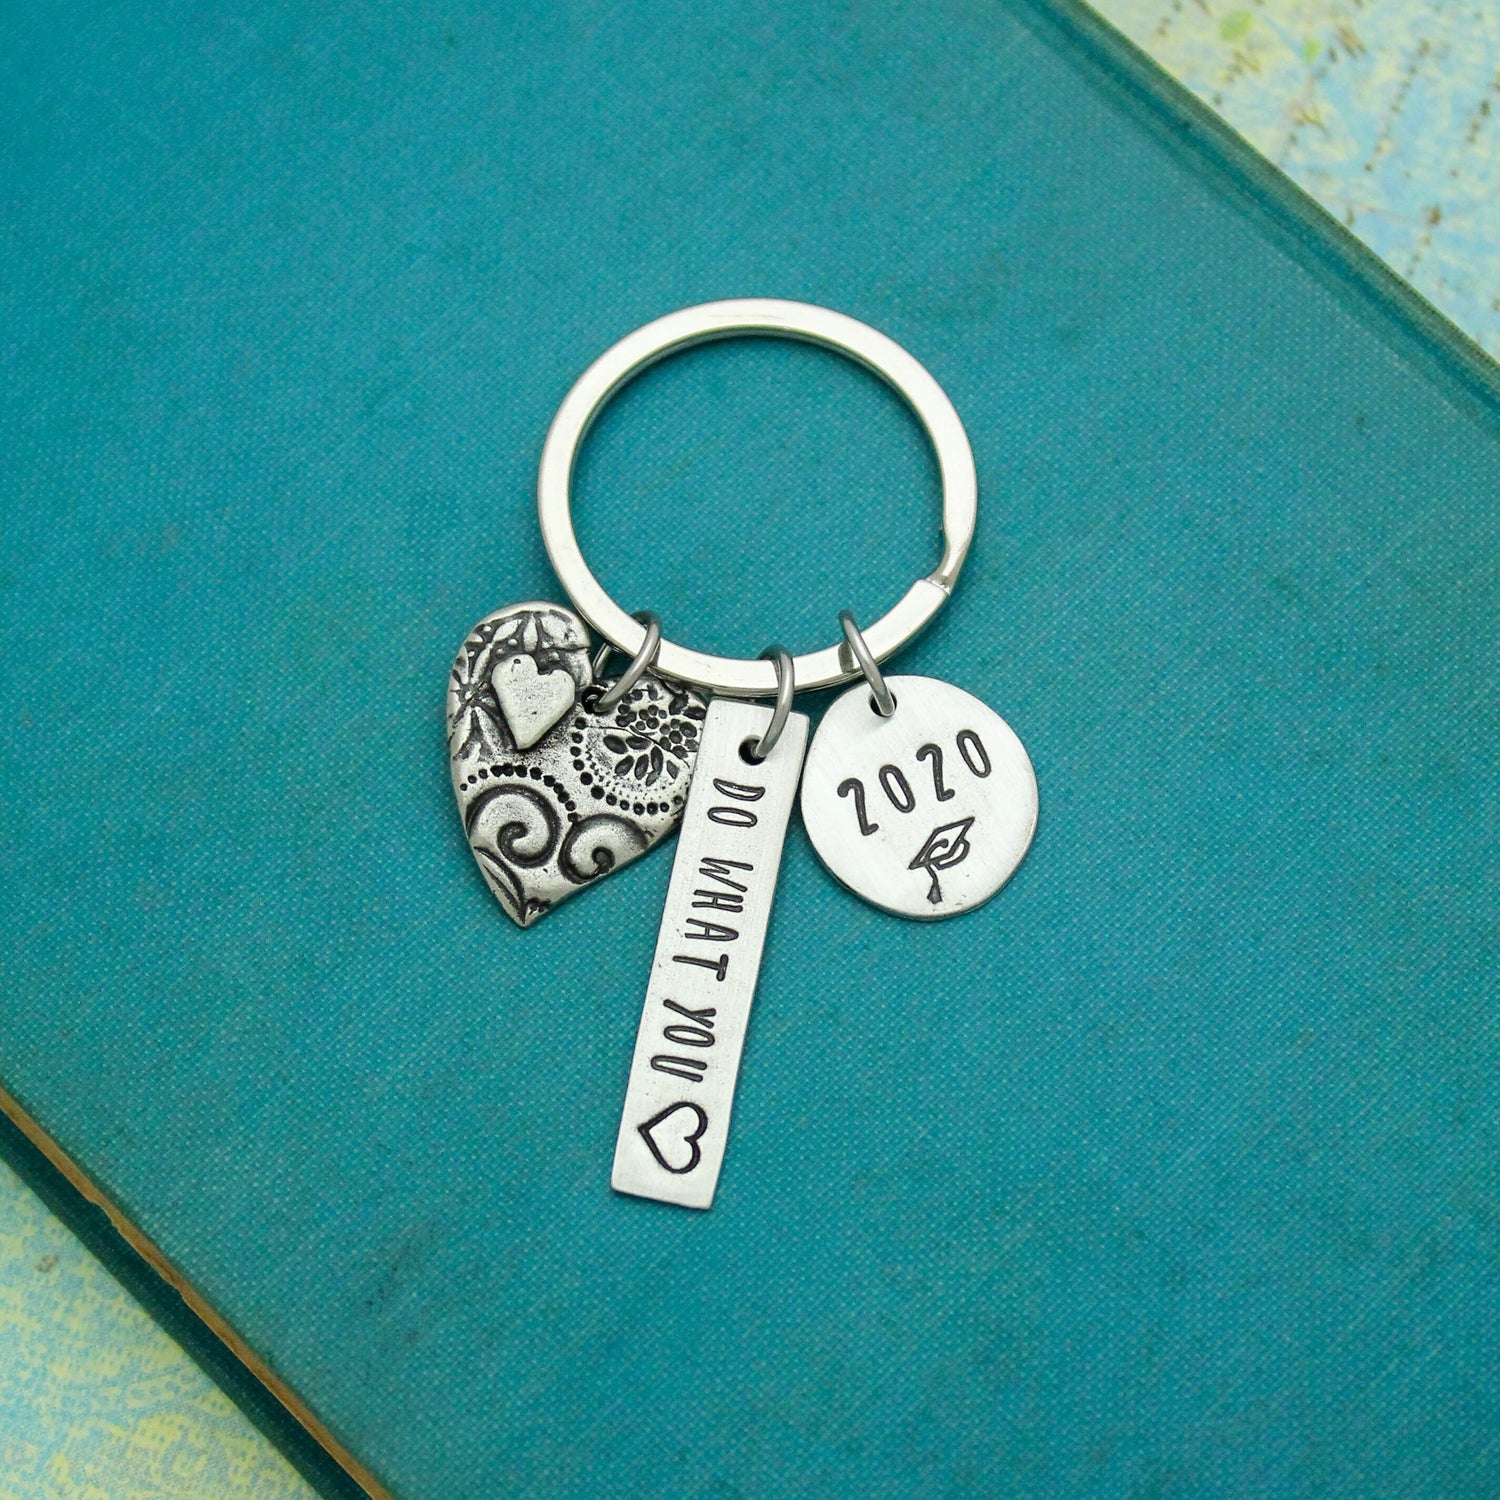 Do What You Love Keychain, Personalized Grad Keychain, Graduation Gifts, Heart Love Keychain, Graduate Gift, Cute + Funky Grad Key Chain